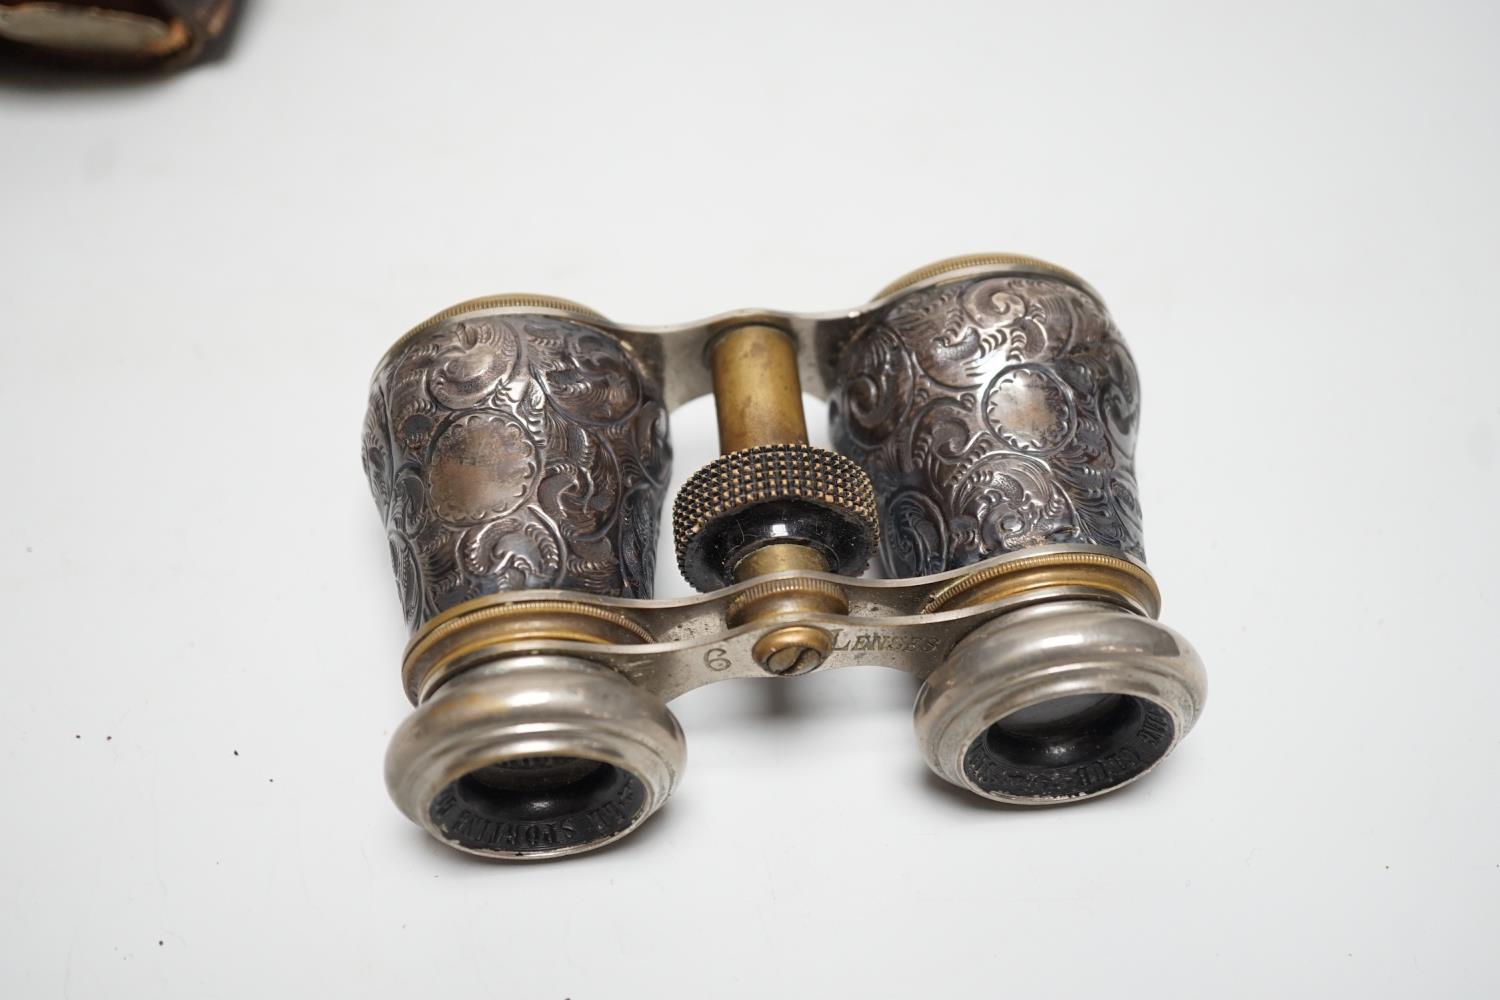 A pair of late Victorian repousse silver mounted brass opera glasses, Birmingham, 1900, (cased) - Image 2 of 4